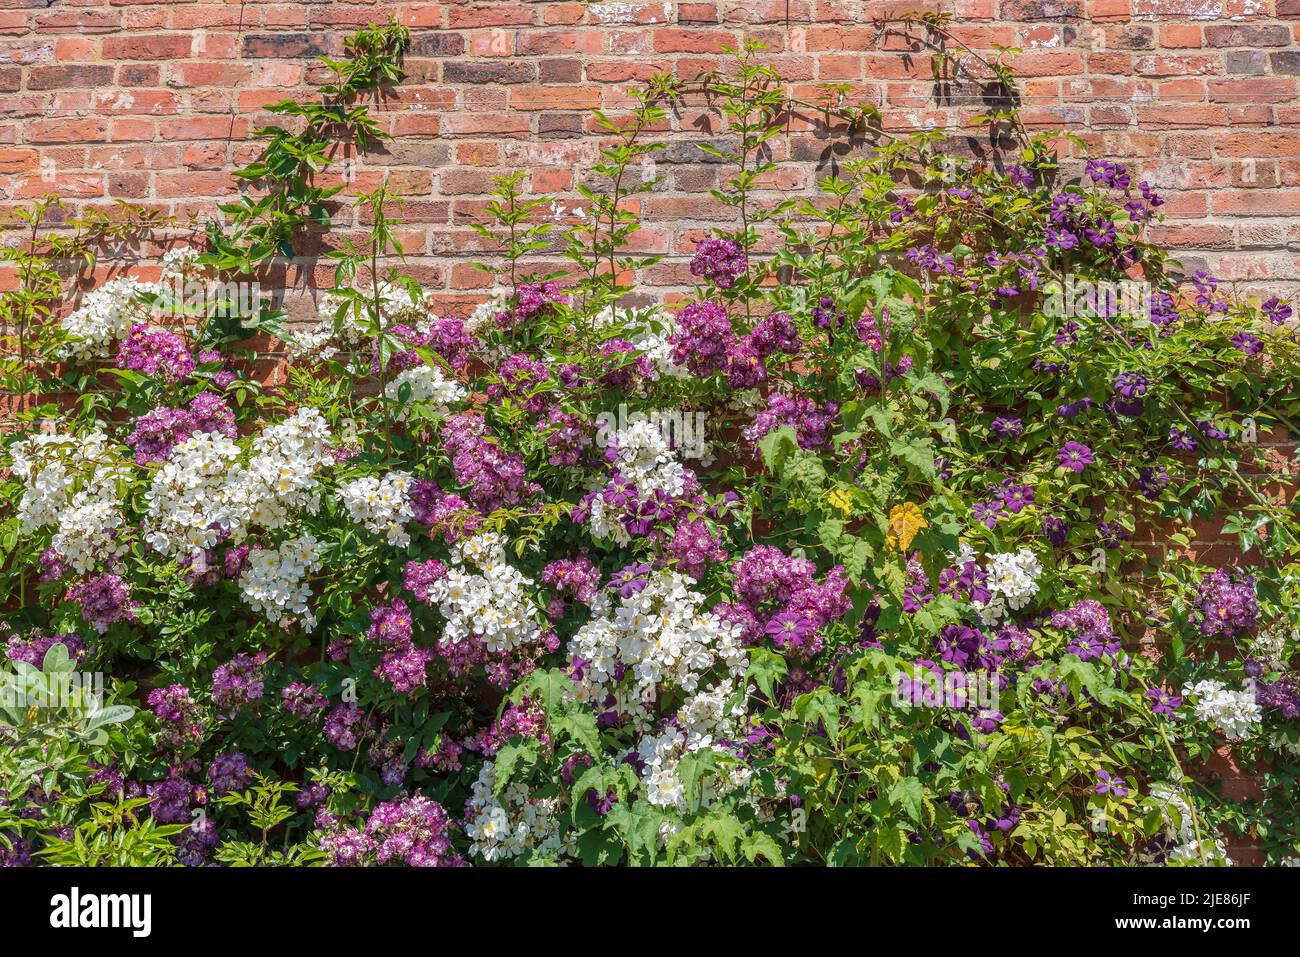 Purple and white climbing roses and clematis flowering plants in a walled garden. Stock Photo